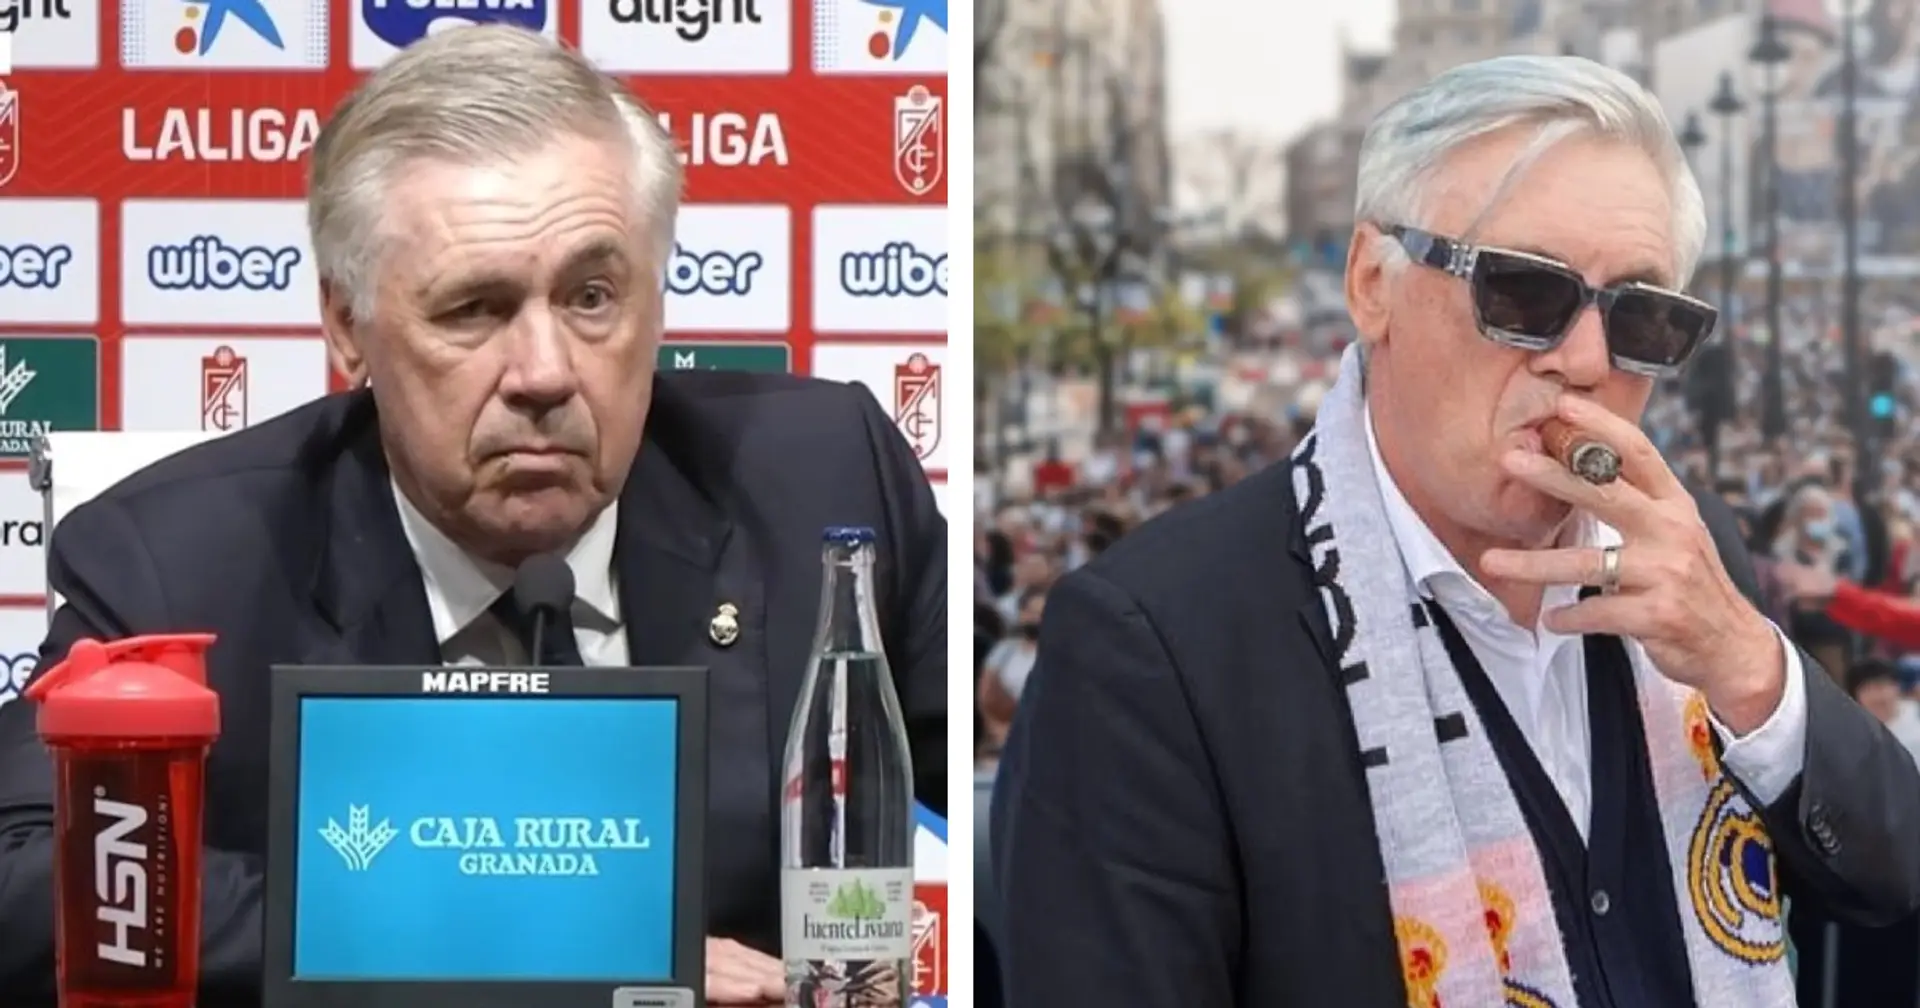 Ancelotti to celebrate title with ‘cigar and glasses’ 